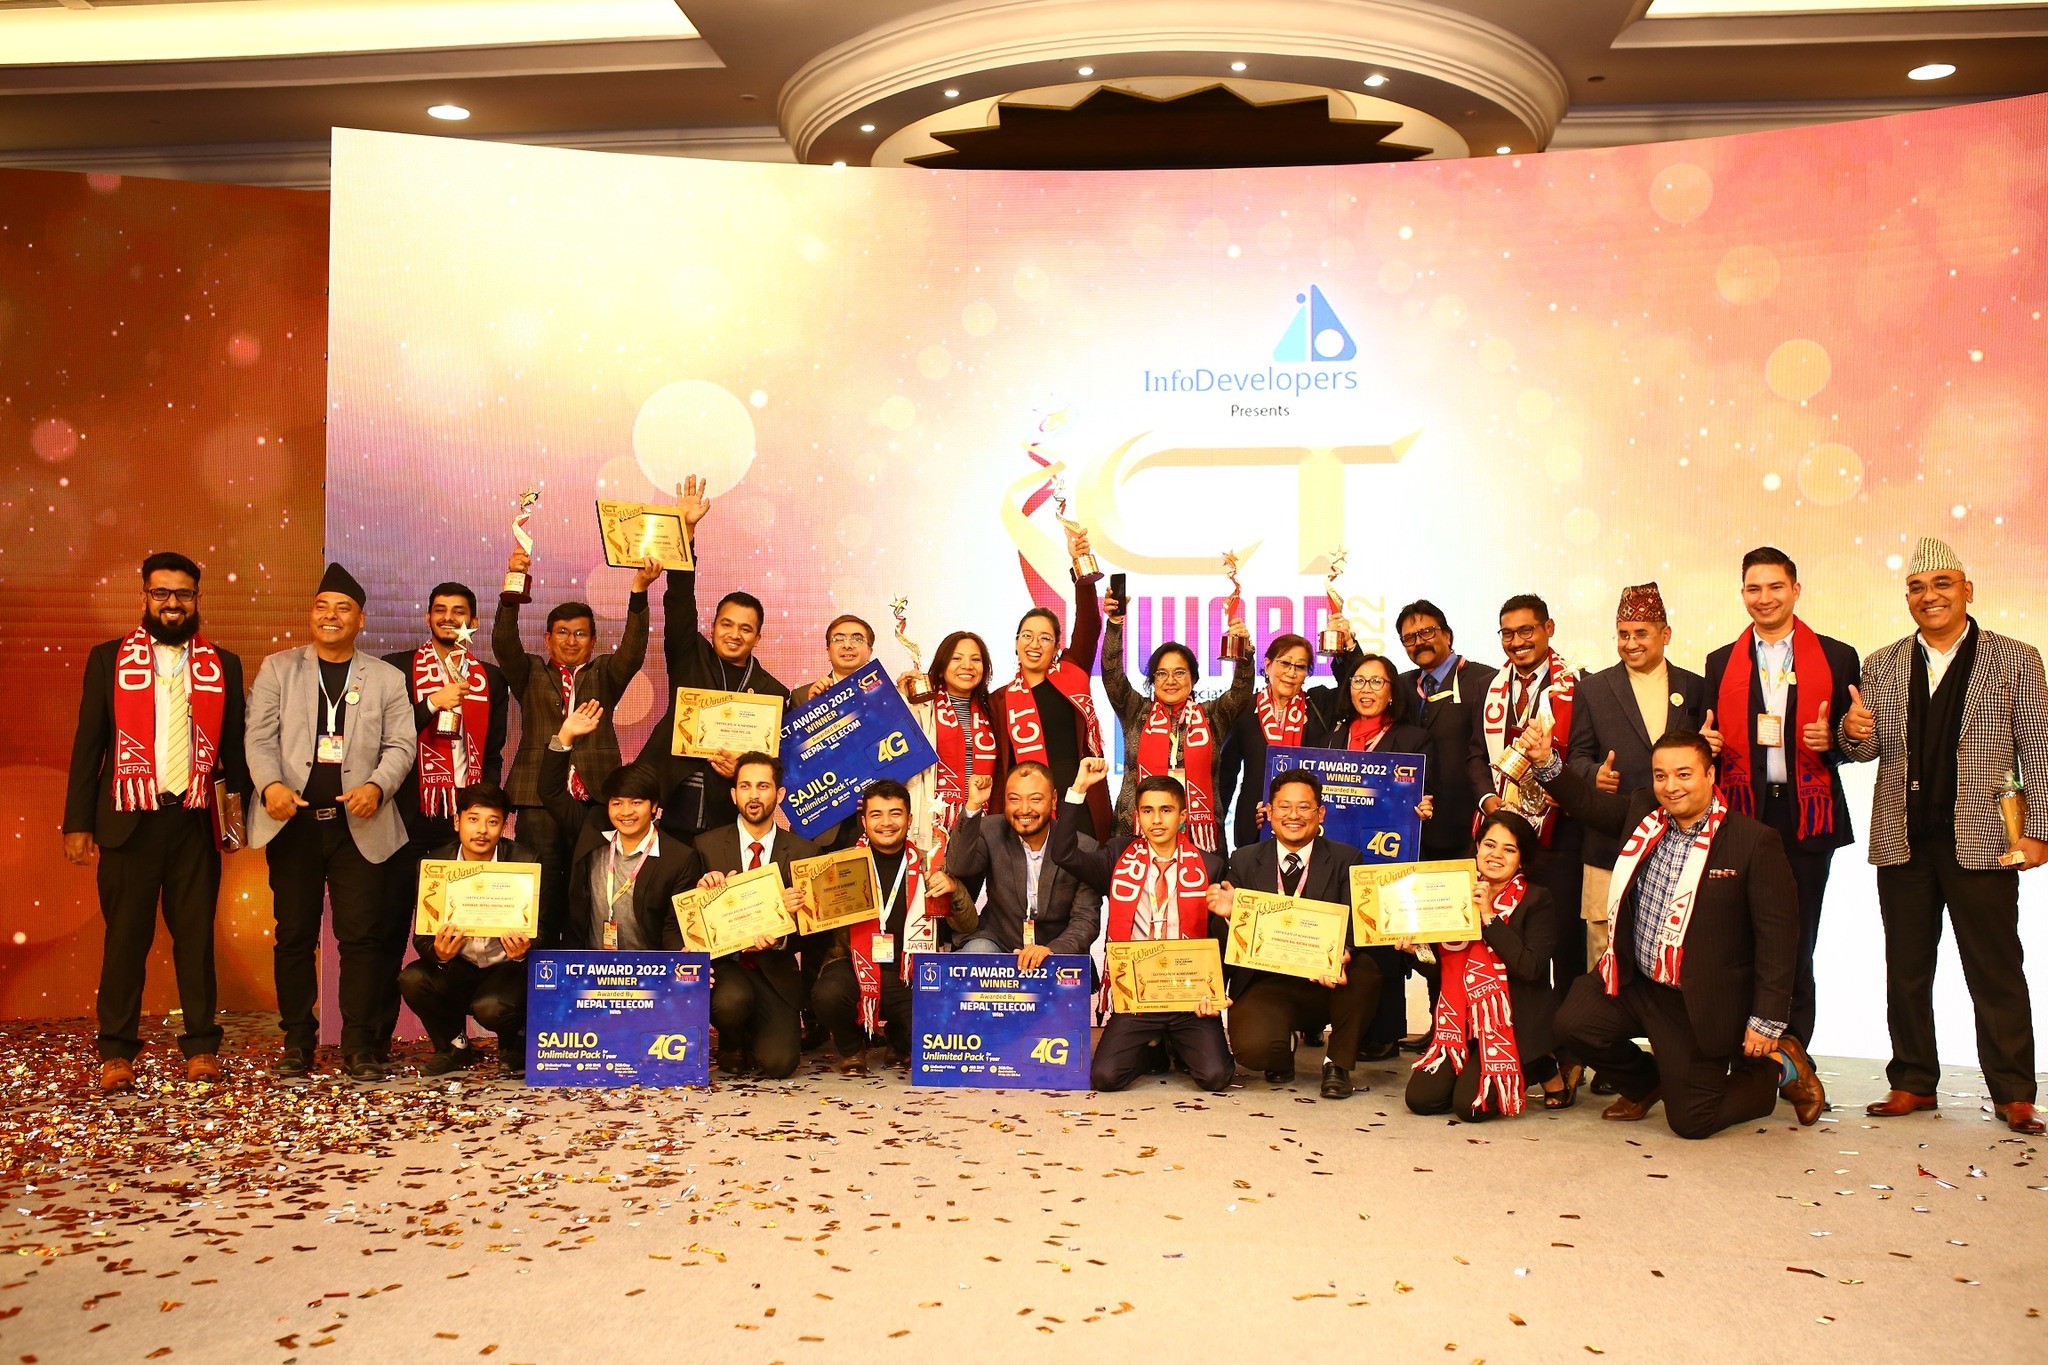 ICT Award 2022 Completed: Award distribution in 14 categories including South Asia Startup Award